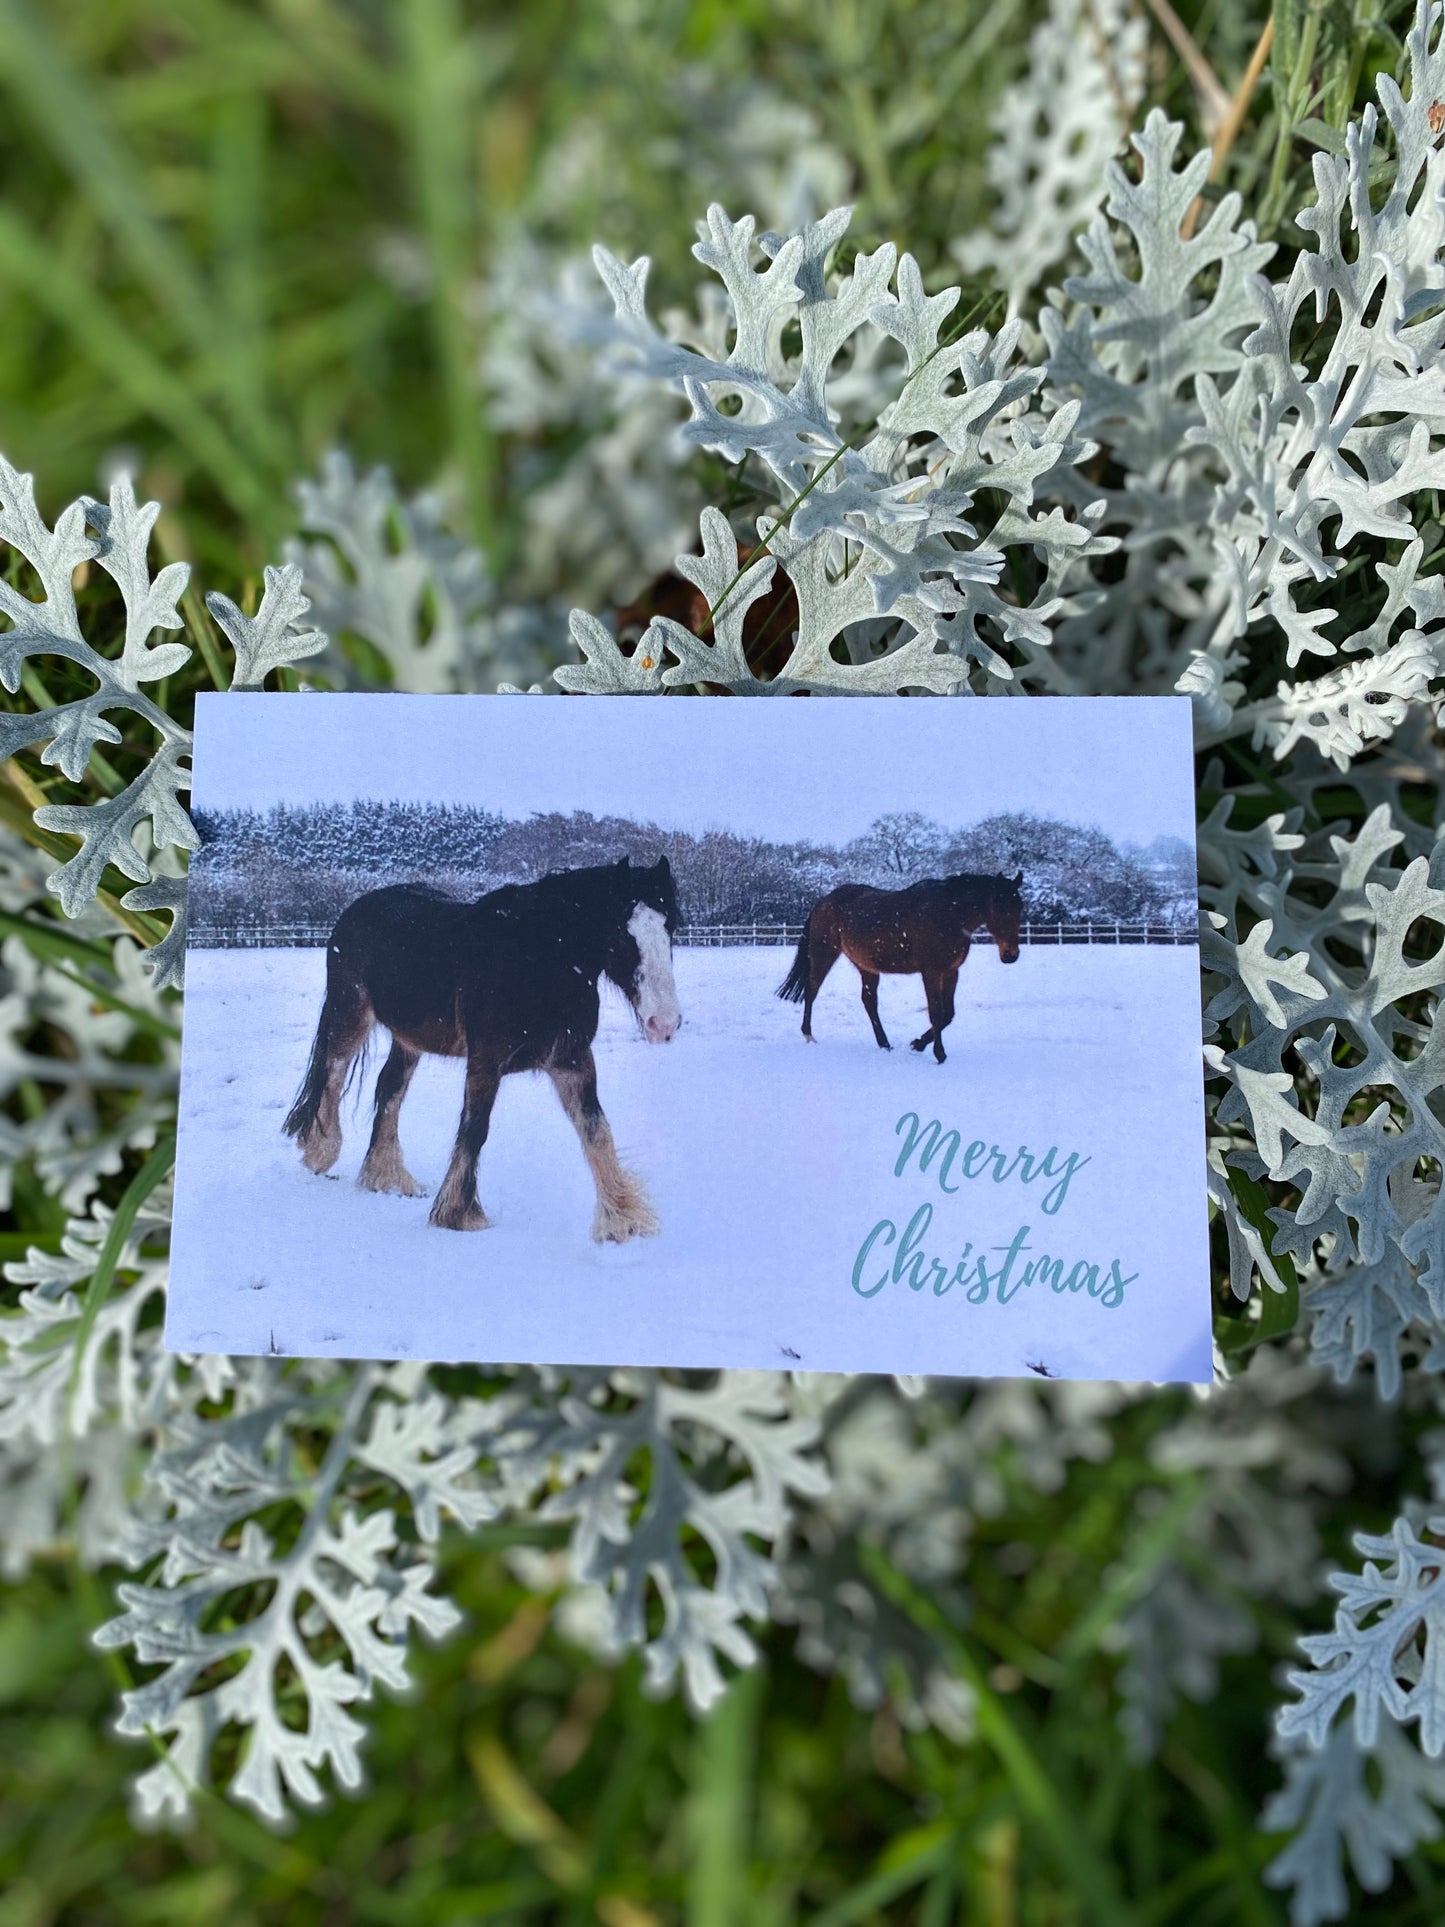 HorseWorld Charity Christmas Cards